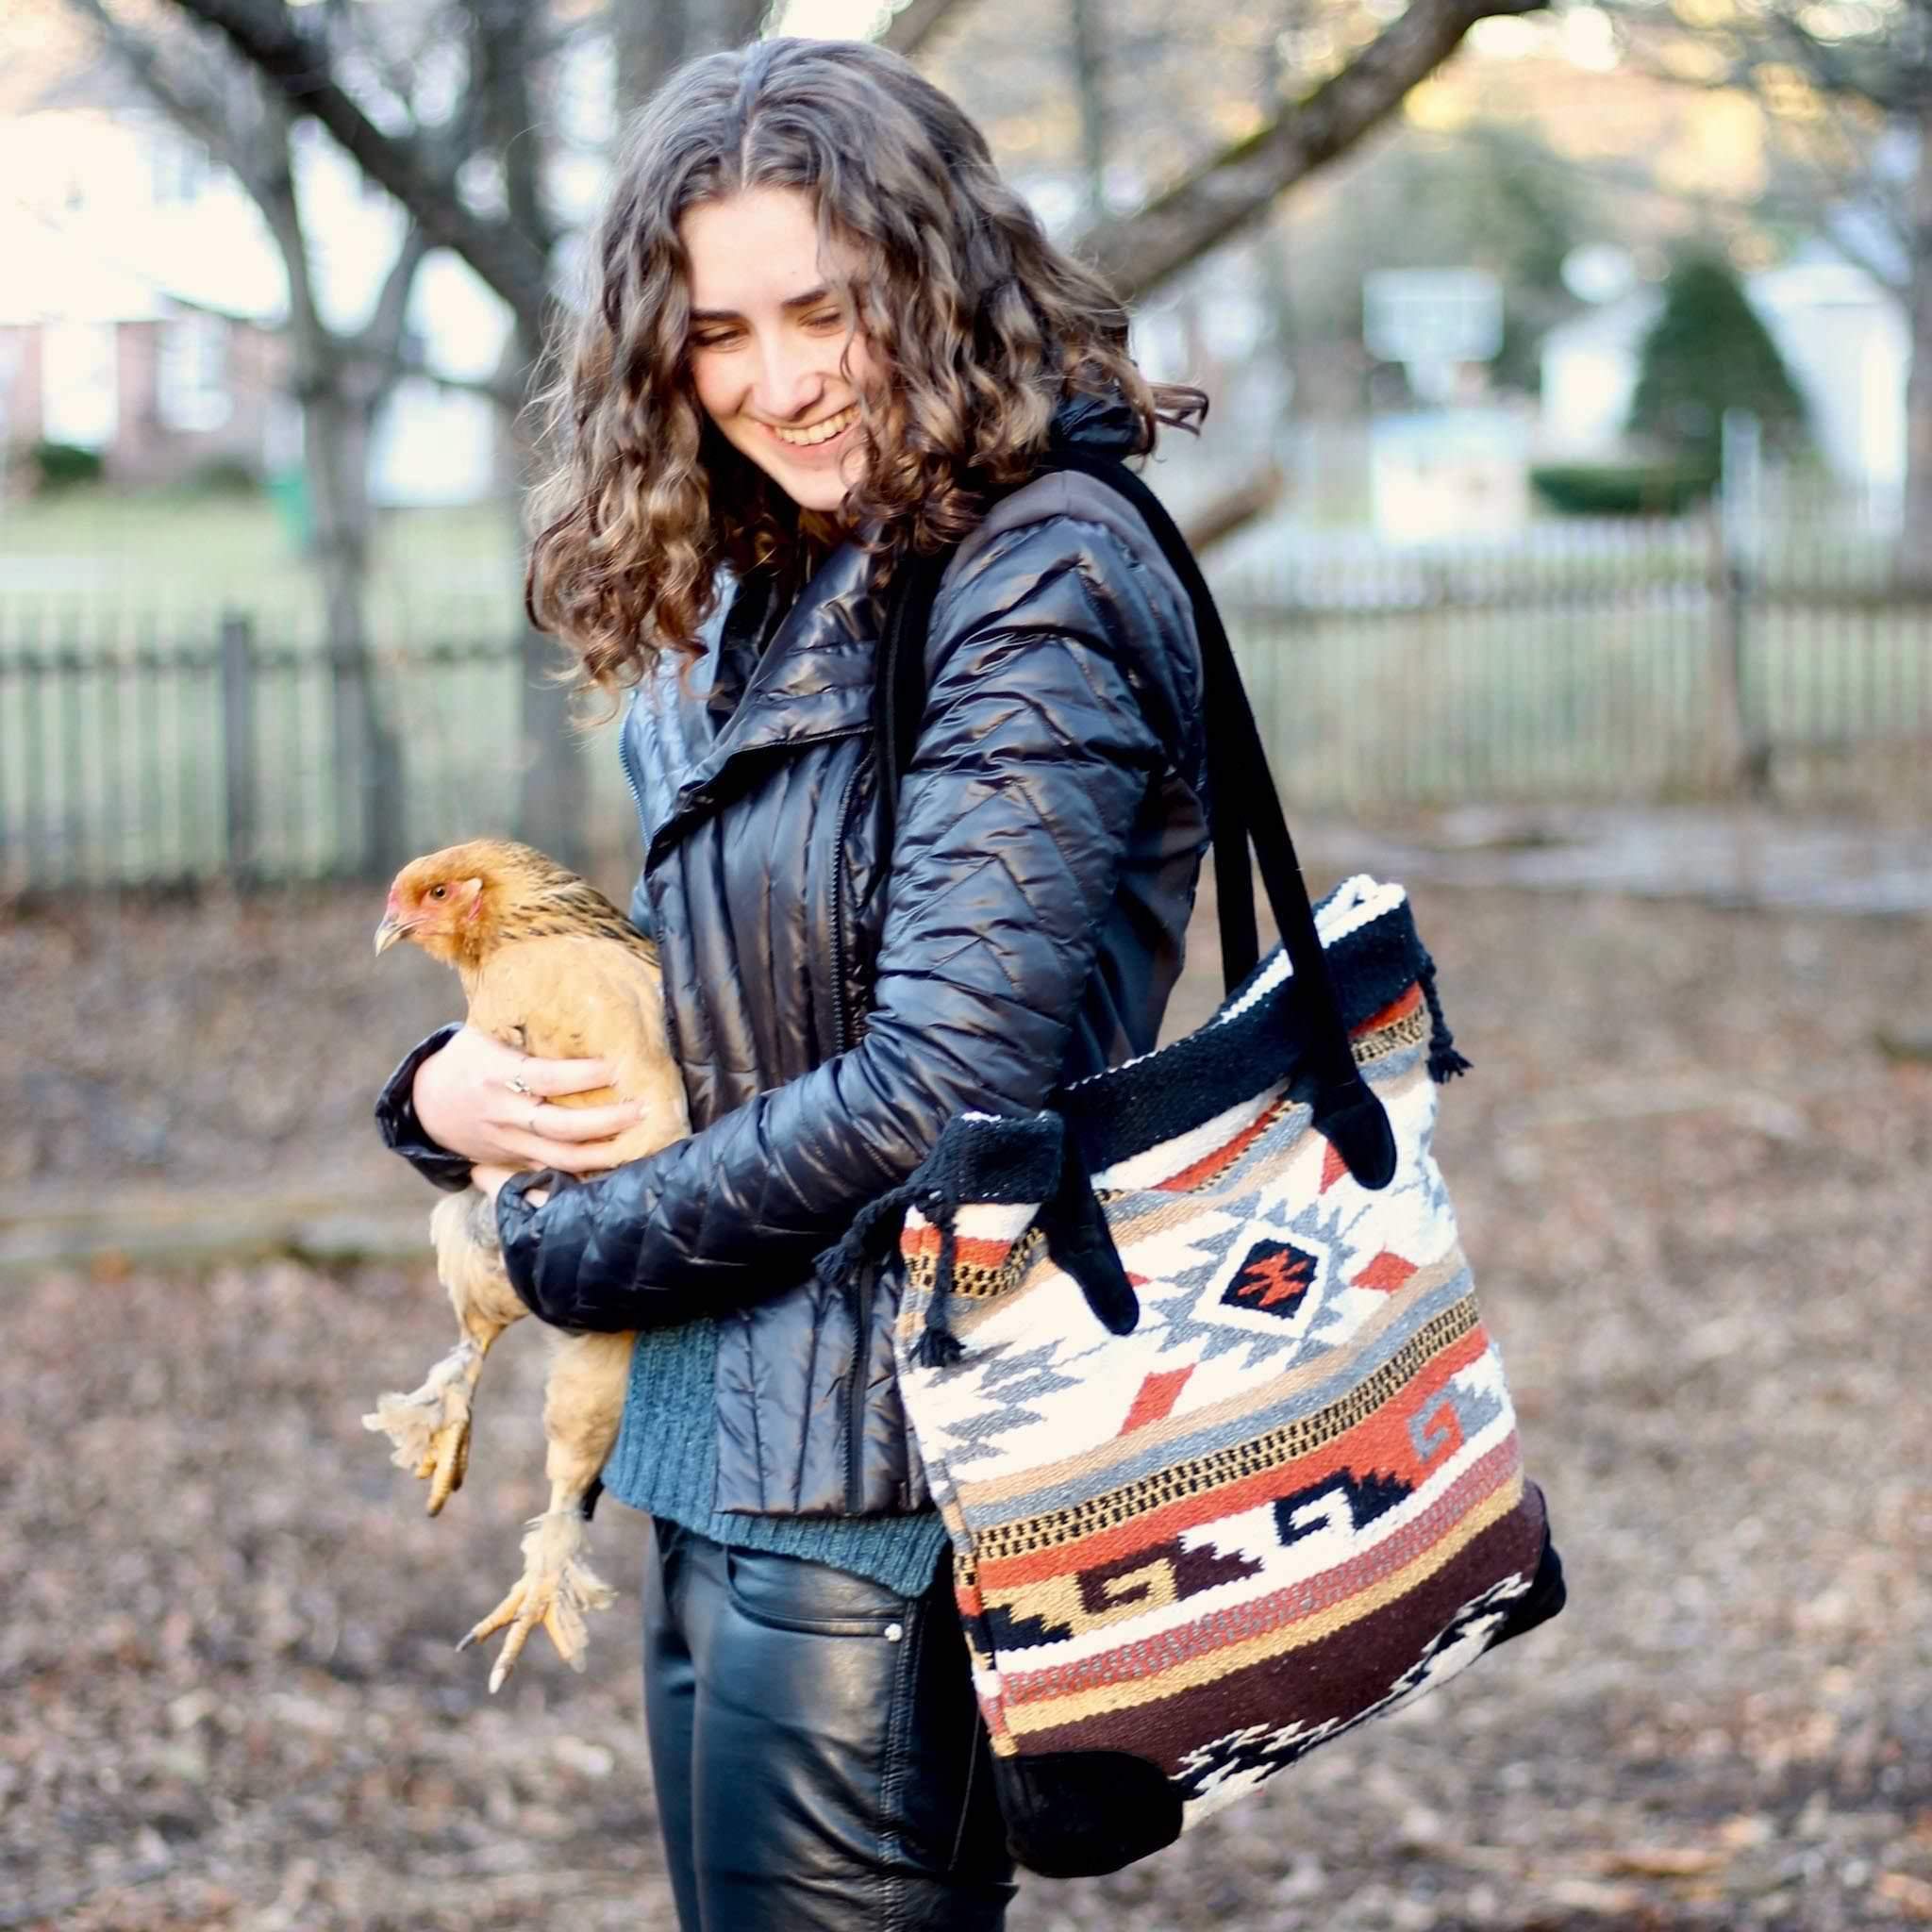 Smiling young woman with light brown wavy hair dressed in black leather jacket and pants, holding an orange chicken and wearing a square shoulder bag with geometric design in dark orange, grey, black, brown and white with black suede straps and bottom corners, against blurred background of bare trees and brown ground.